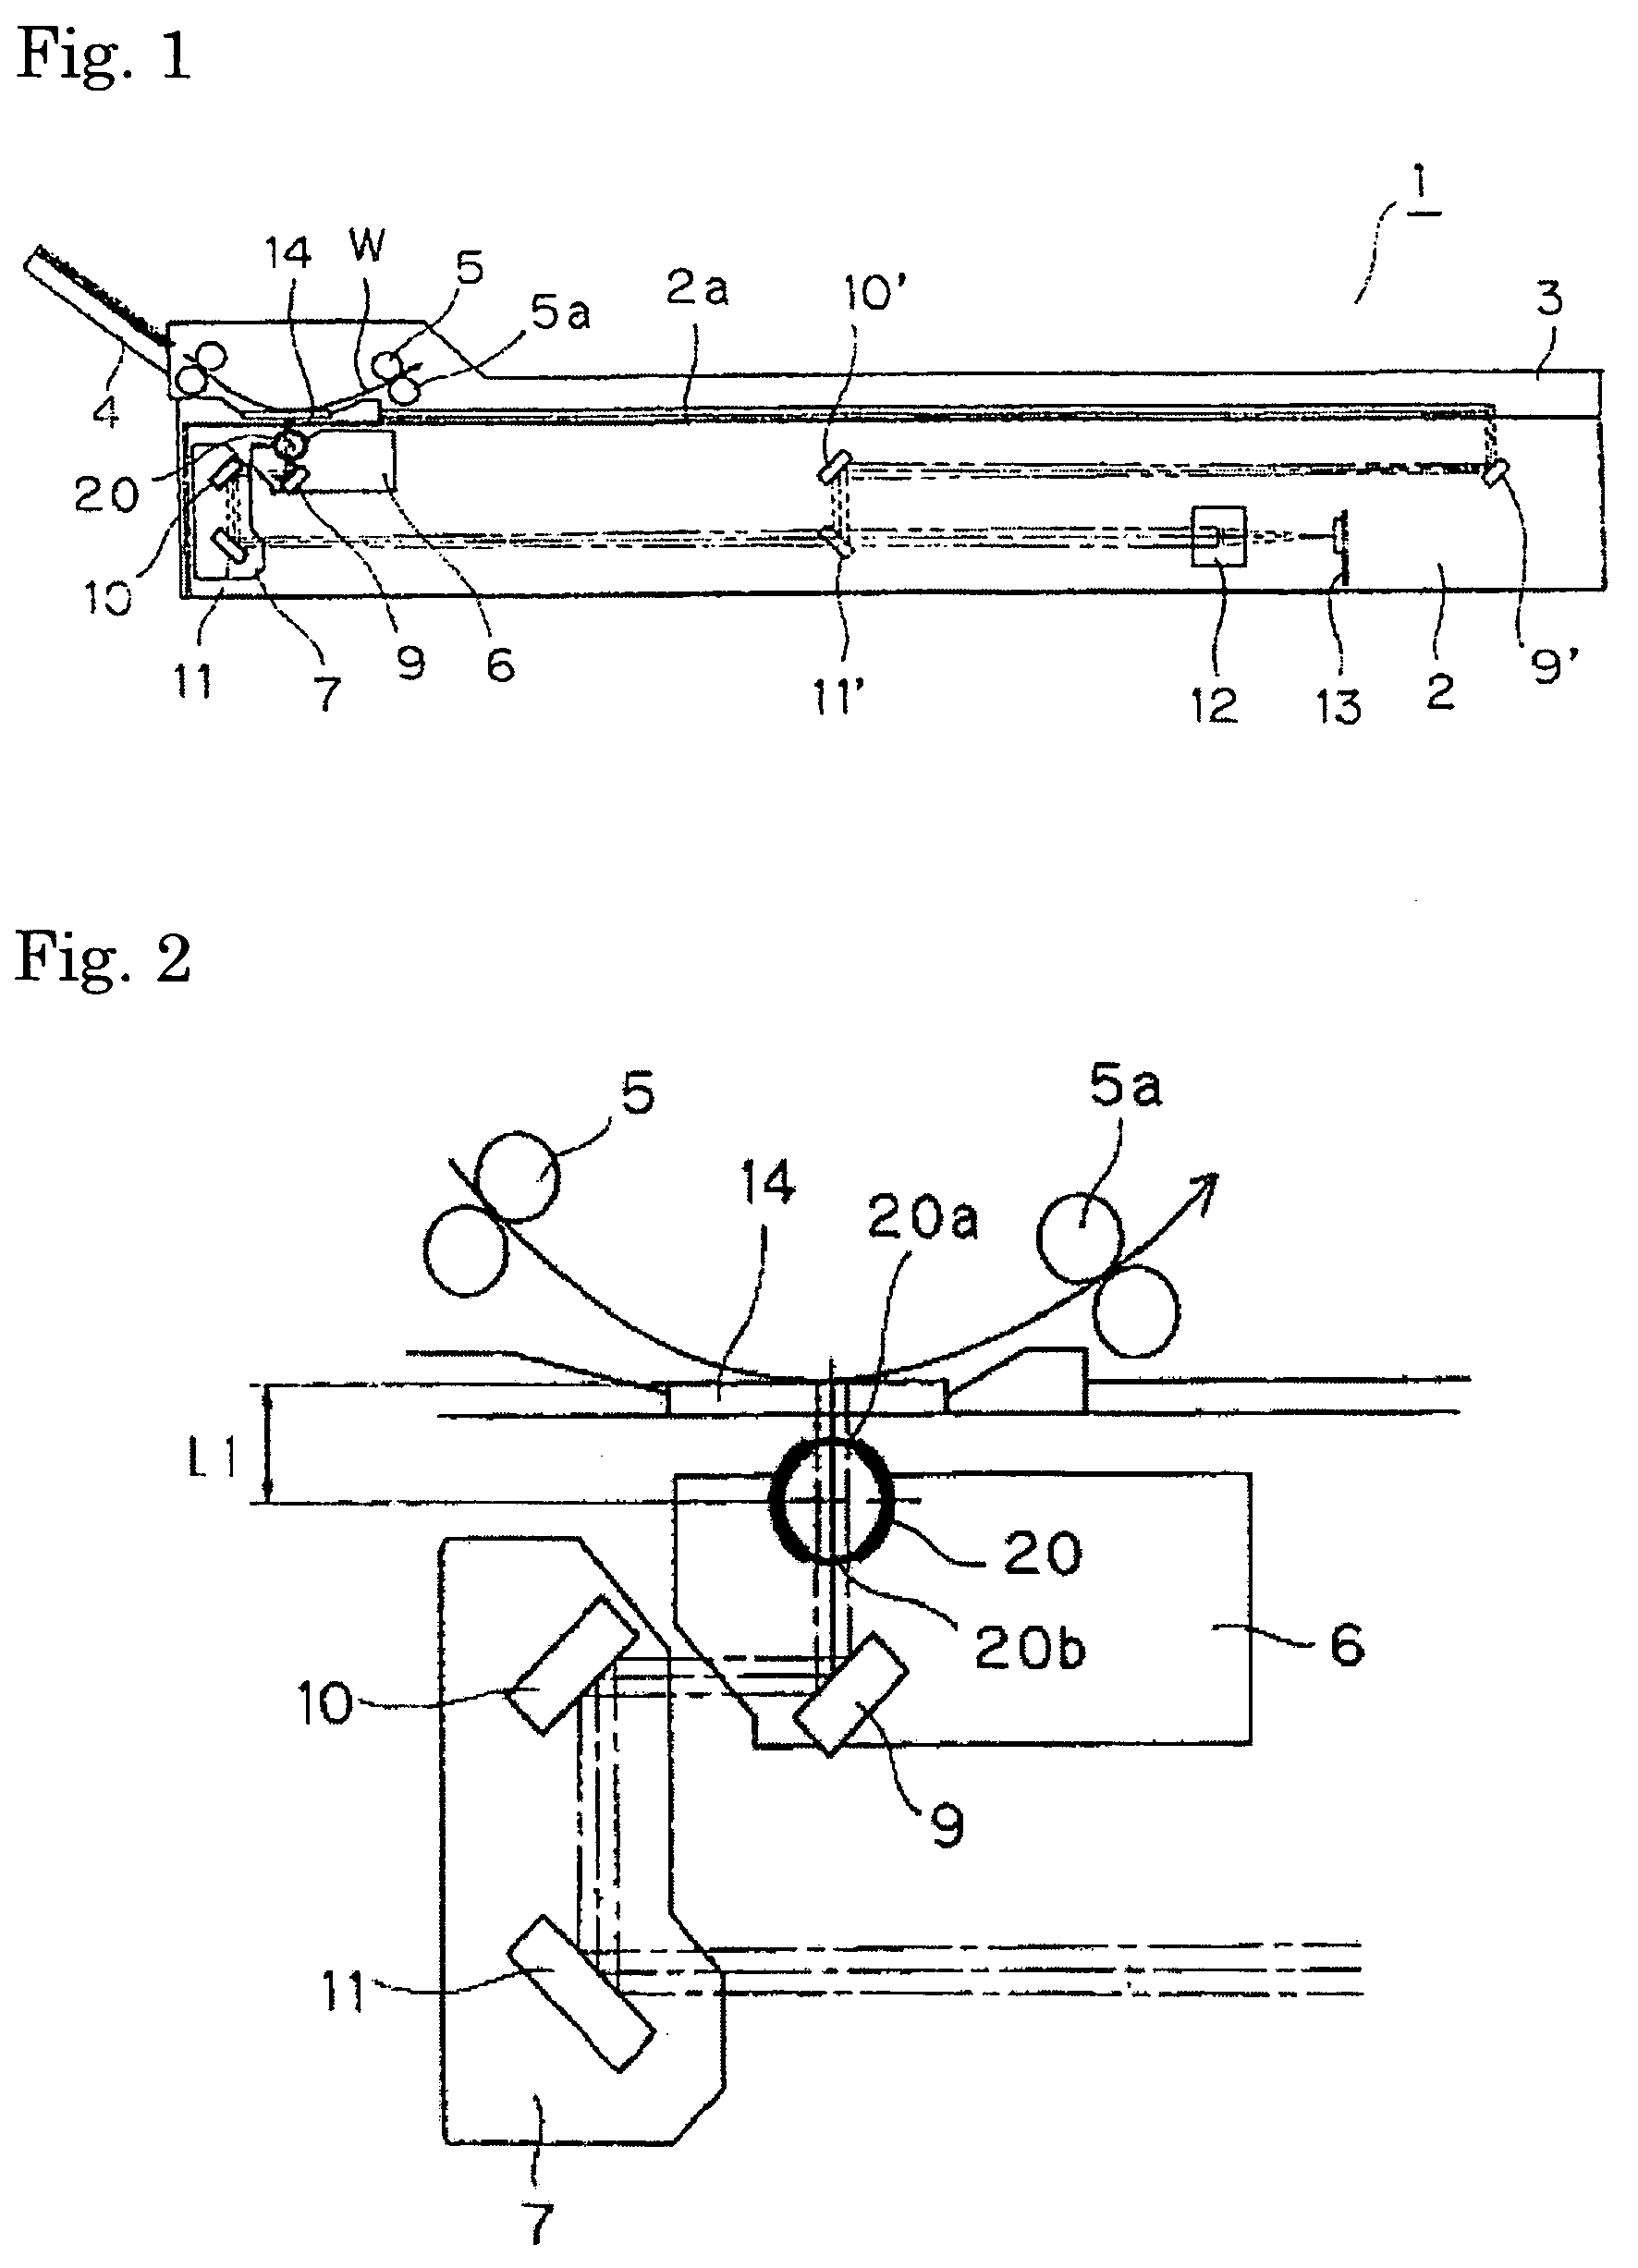 Image reading apparatus and light source